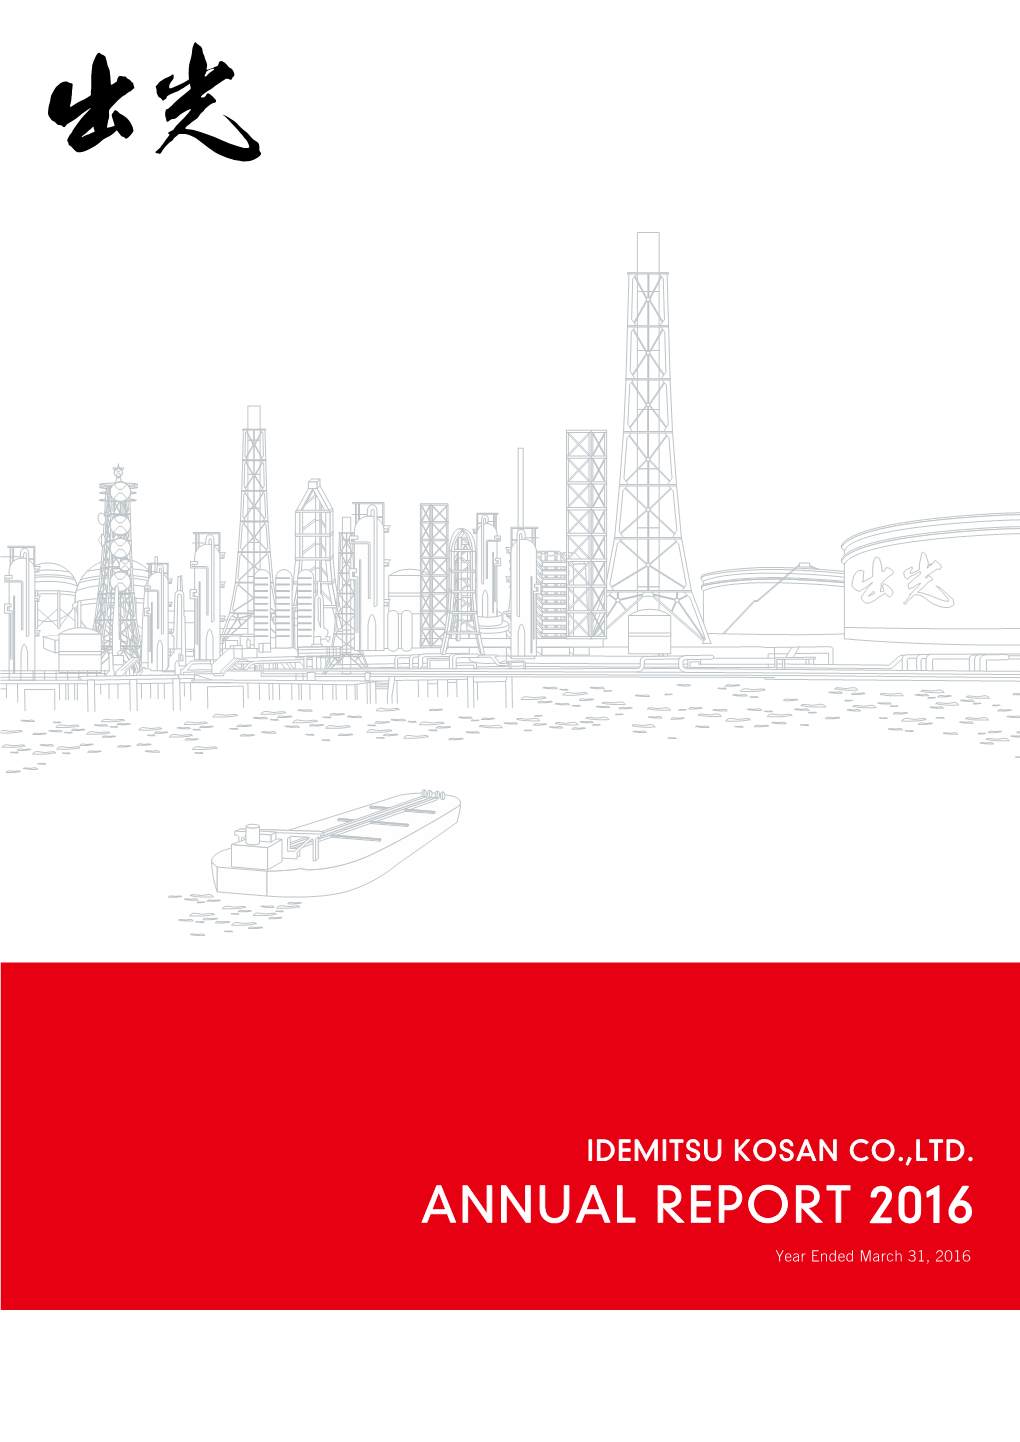 ANNUAL REPORT 2016 Year Ended March 31, 2016 Topics in Fiscal Year 2015